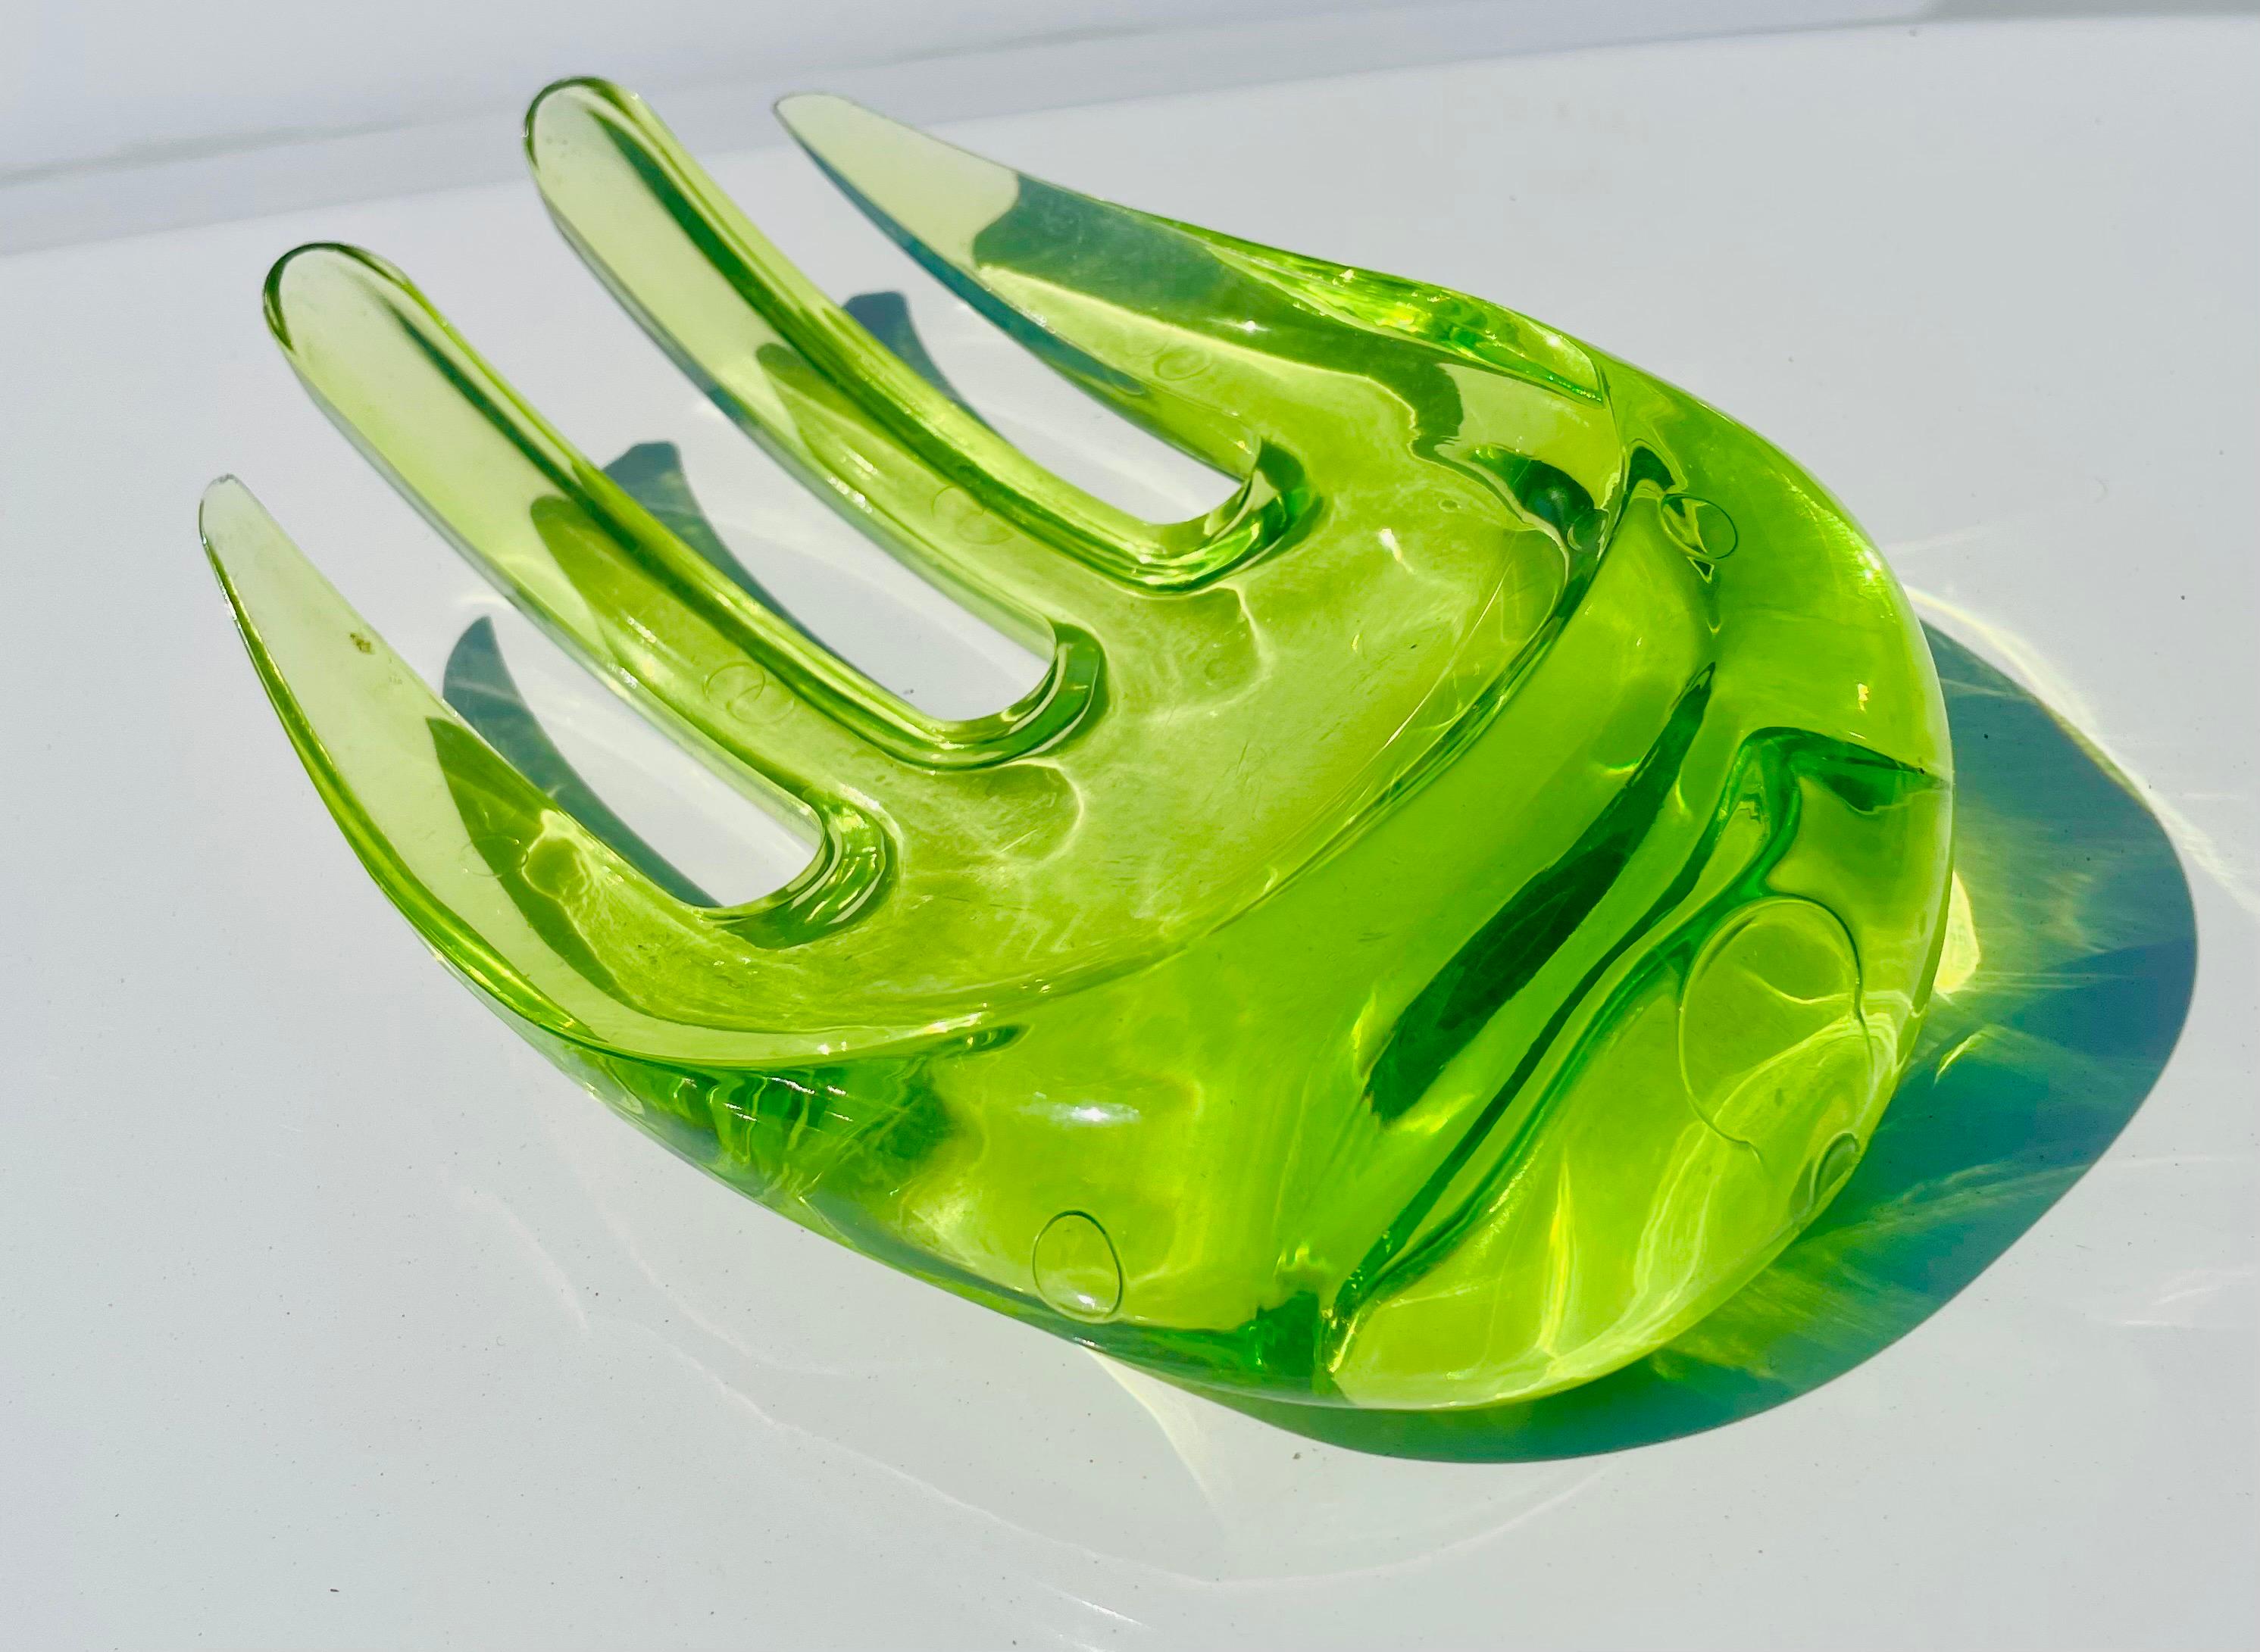 Very cool and unique hand soap dish circa 1980s got in Italy a few years ago, made of lucite with a green fluorescent color, a great piece of pop art.